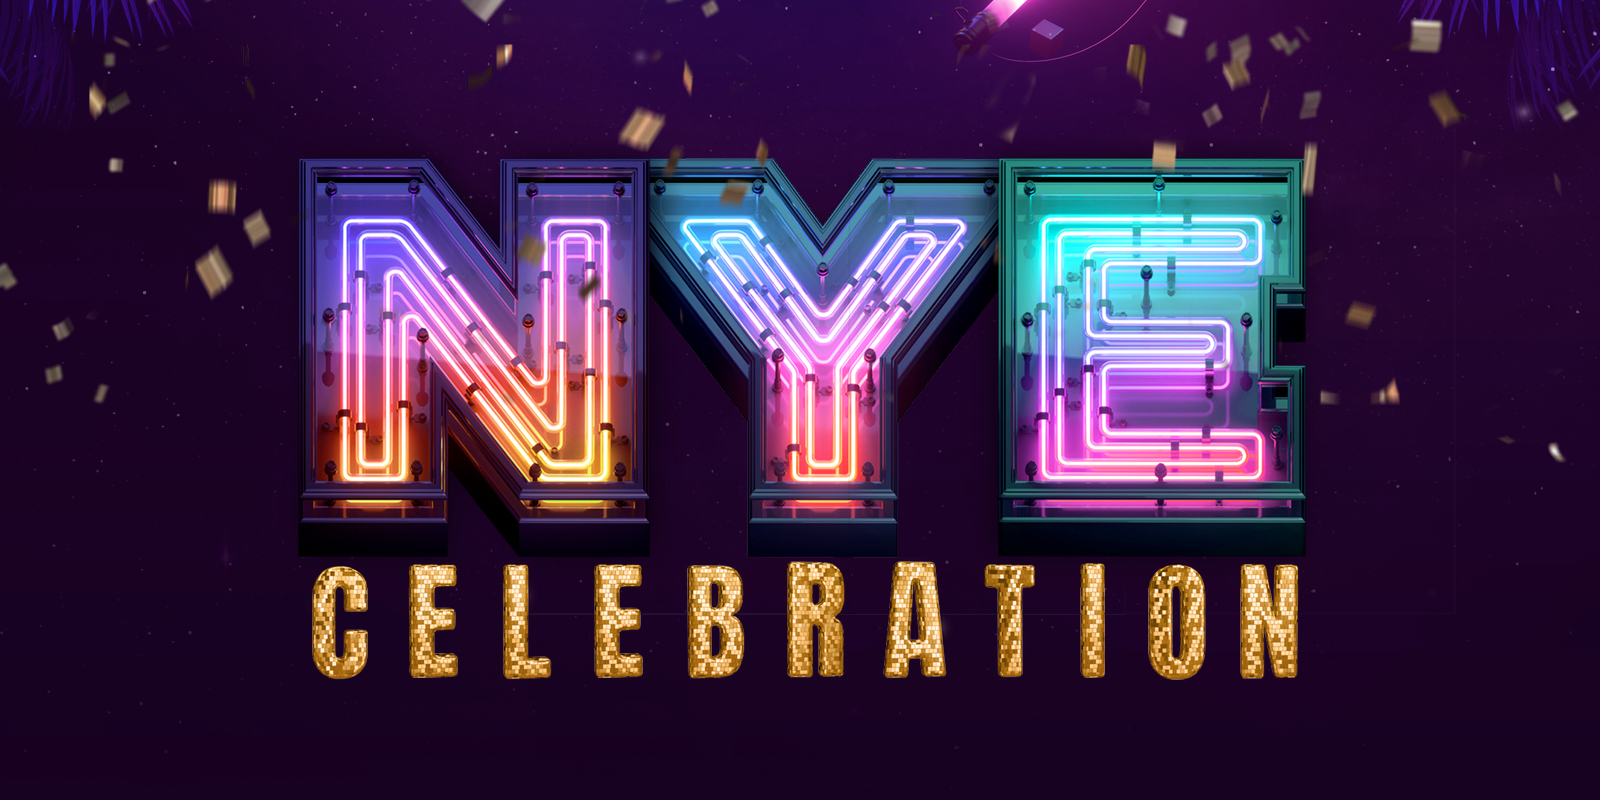 New Year's Eve 2022 celebration creatives that have a neon sign esthetic